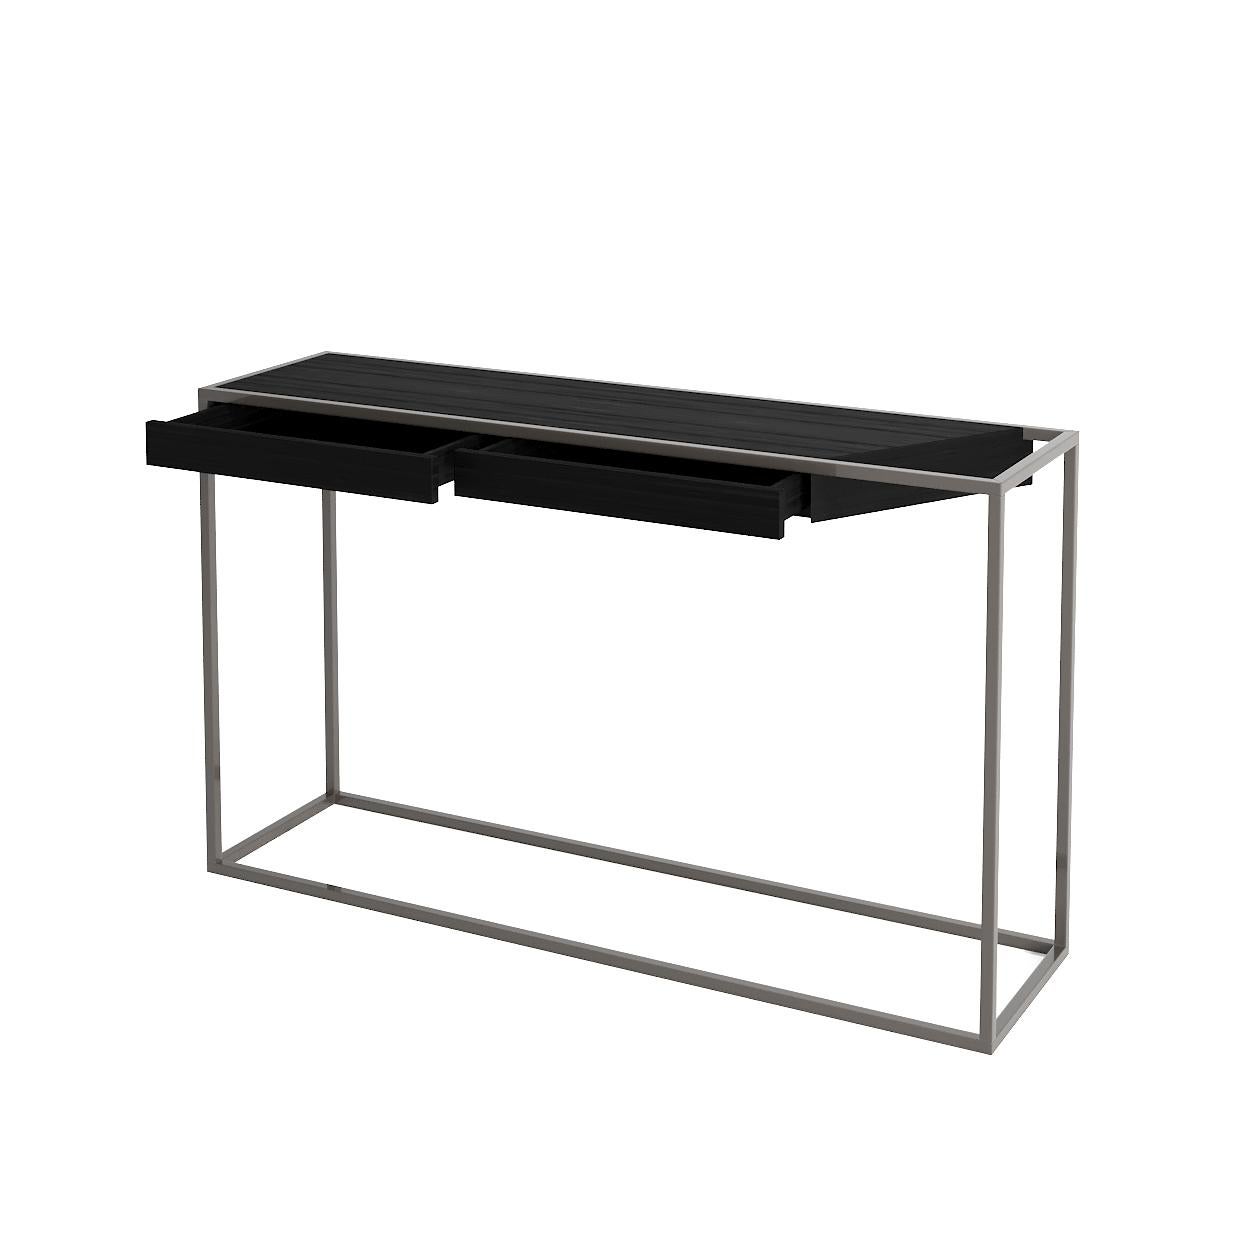 Veneer Modern Minimalist Rectangular Console Table Black Oak Wood and Black Lacquer For Sale